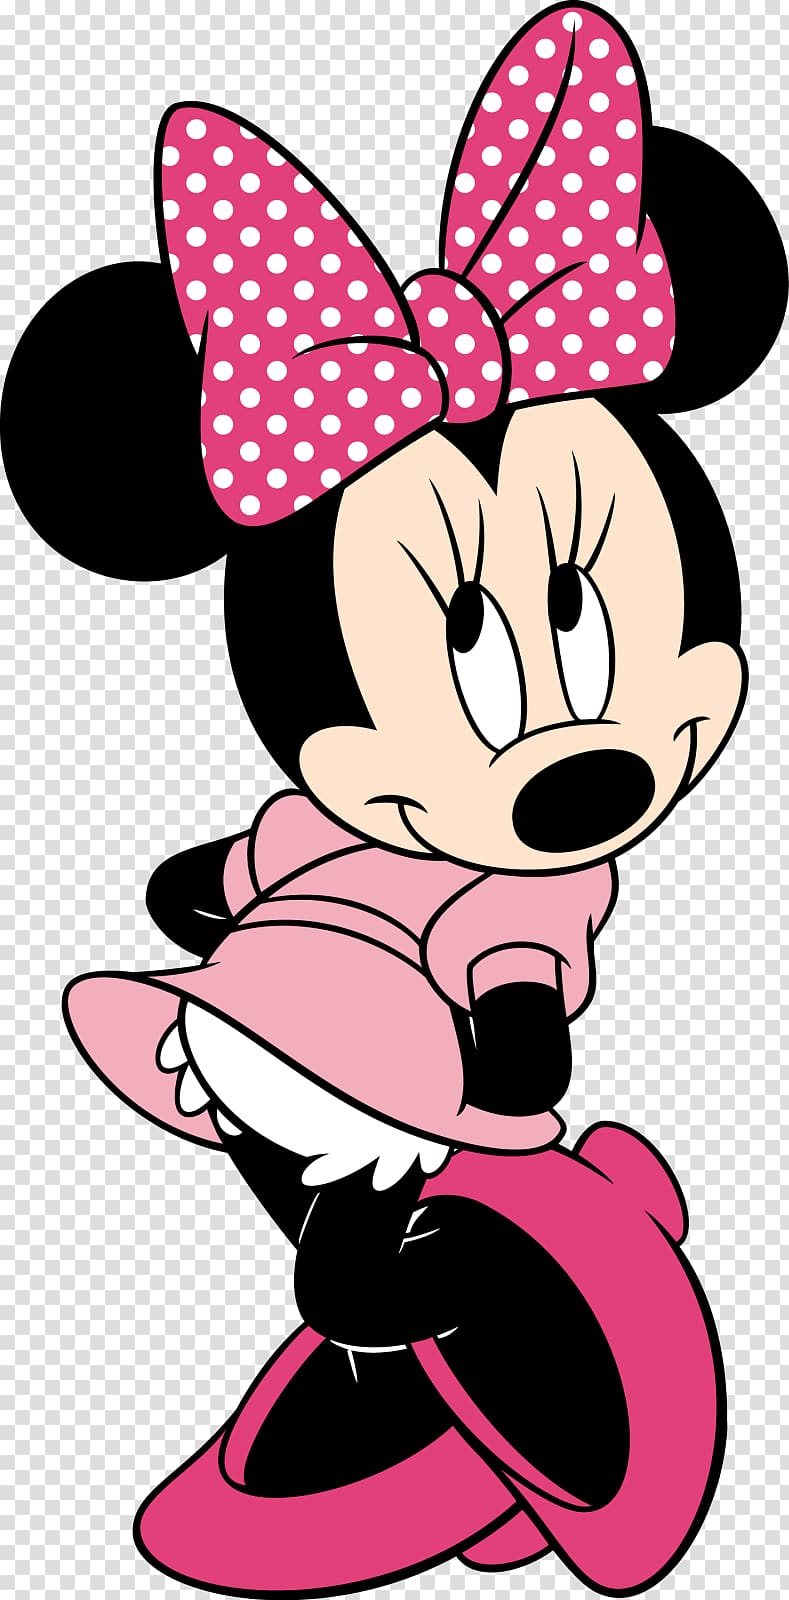 Minnie Mouse illustration, Minnie Mouse Mickey Mouse , Minnie Mouse transparent background PNG clipart